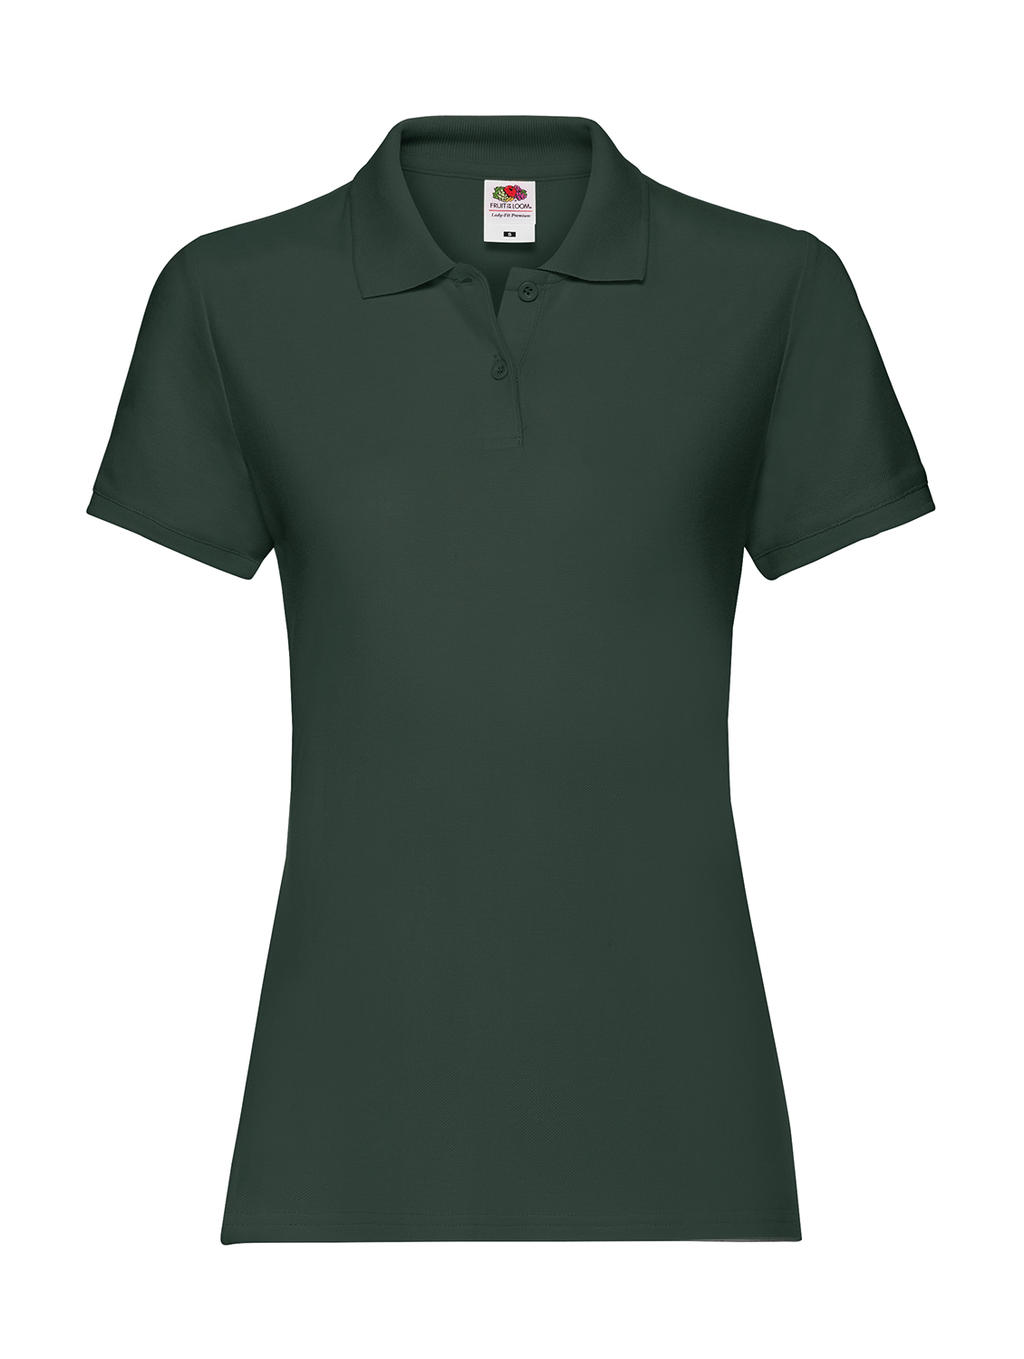  Ladies Premium Polo in Farbe Forest Green